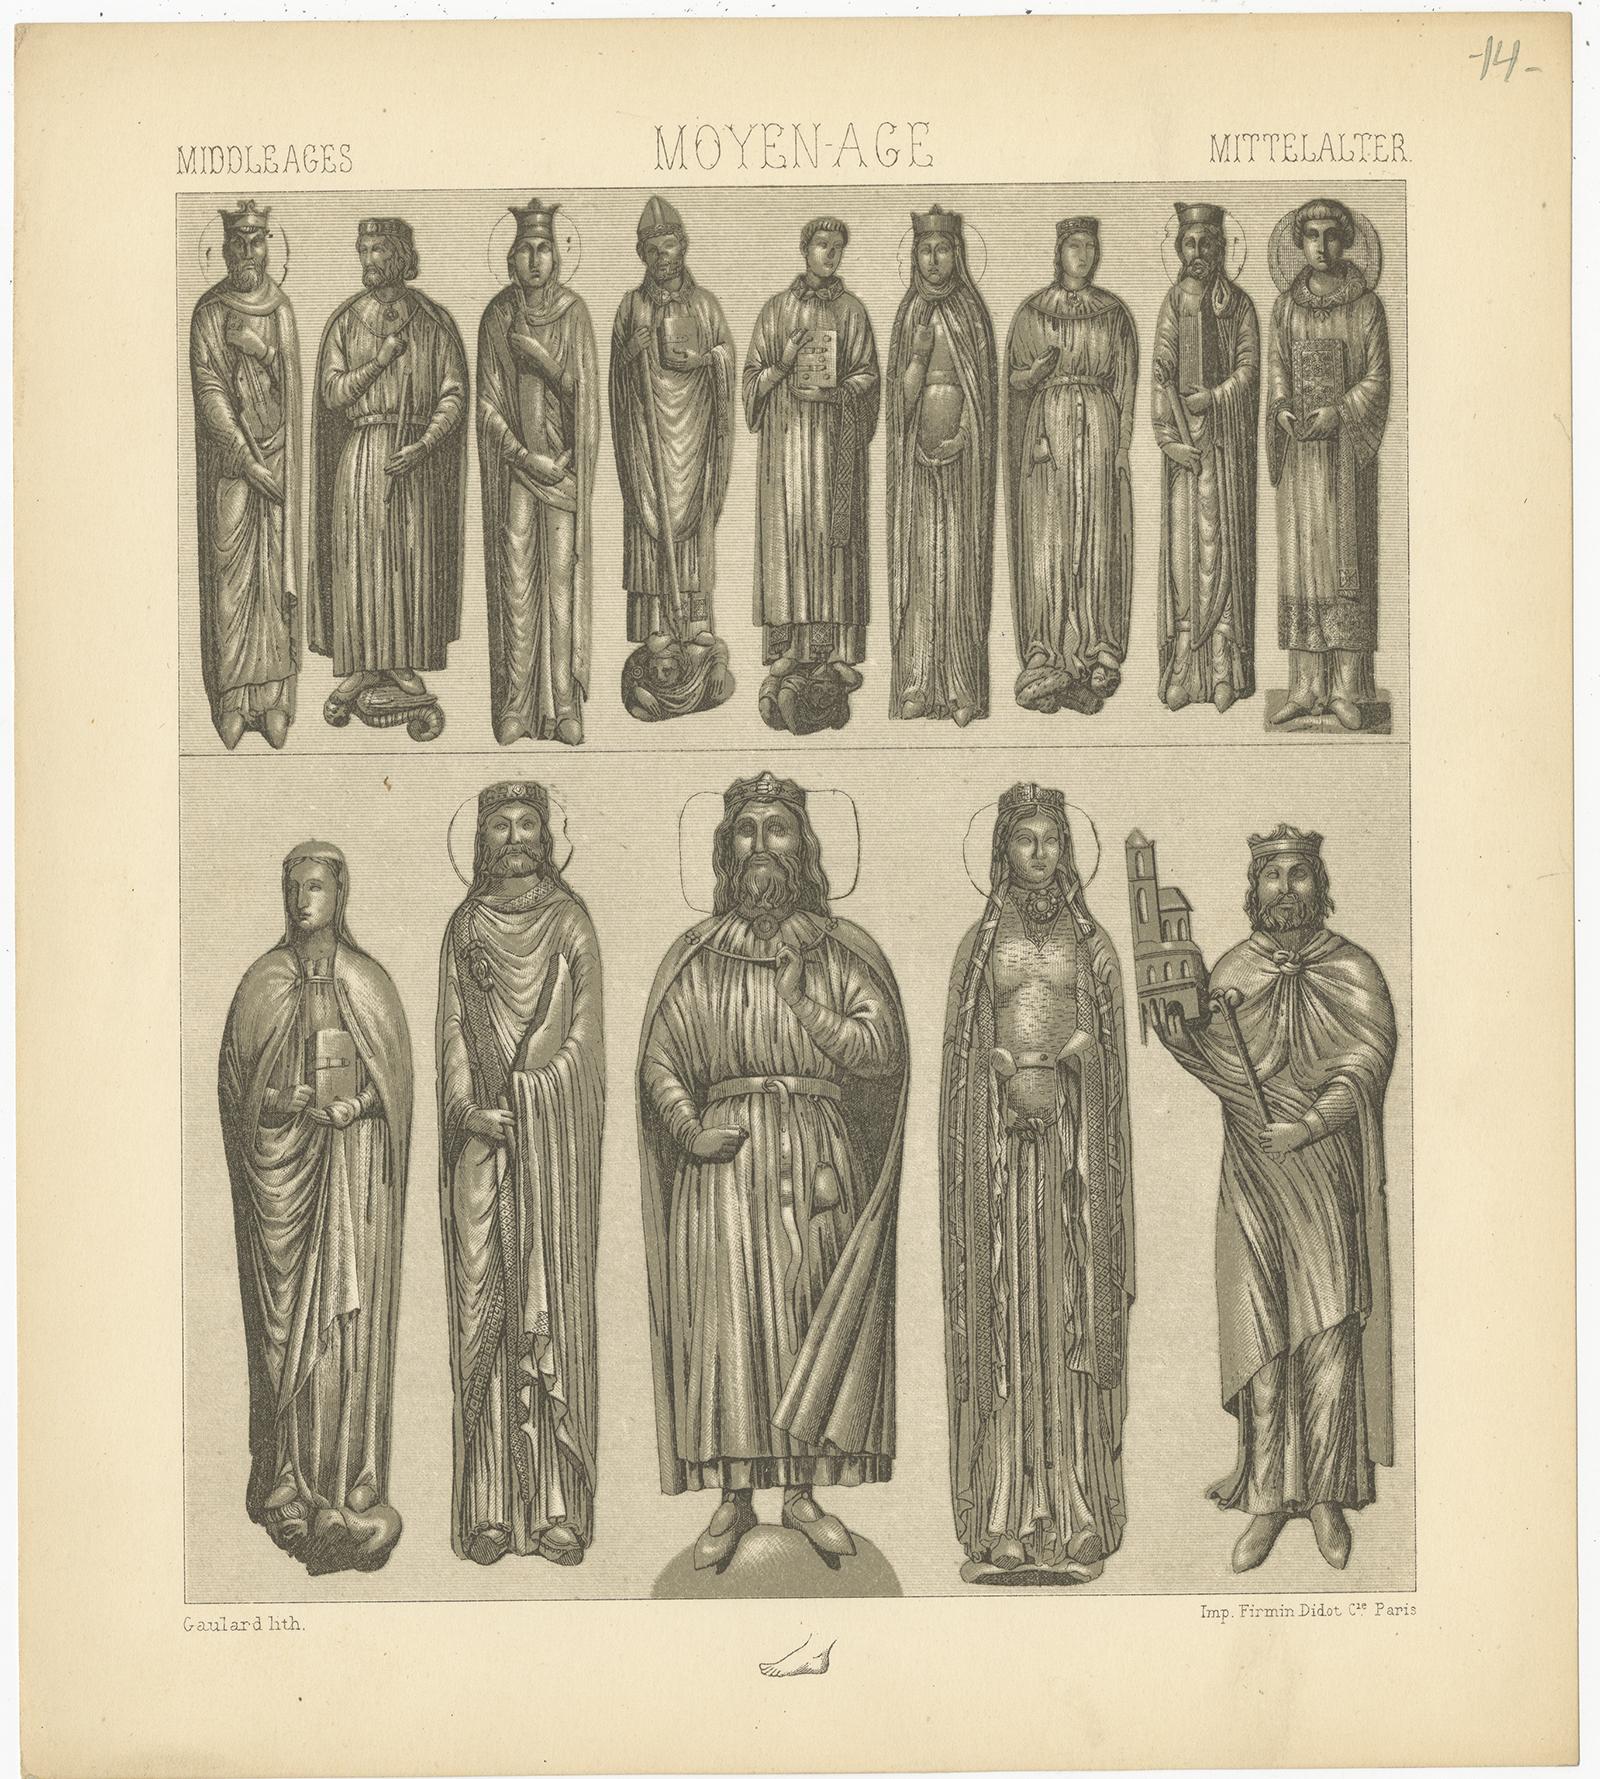 Antique print titled 'Middle Ages - Moyen Age - Mittelalter'. Chromolithograph of Middle Ages Statues Objects. This print originates from 'Le Costume Historique' by M.A. Racinet. Published circa 1880.